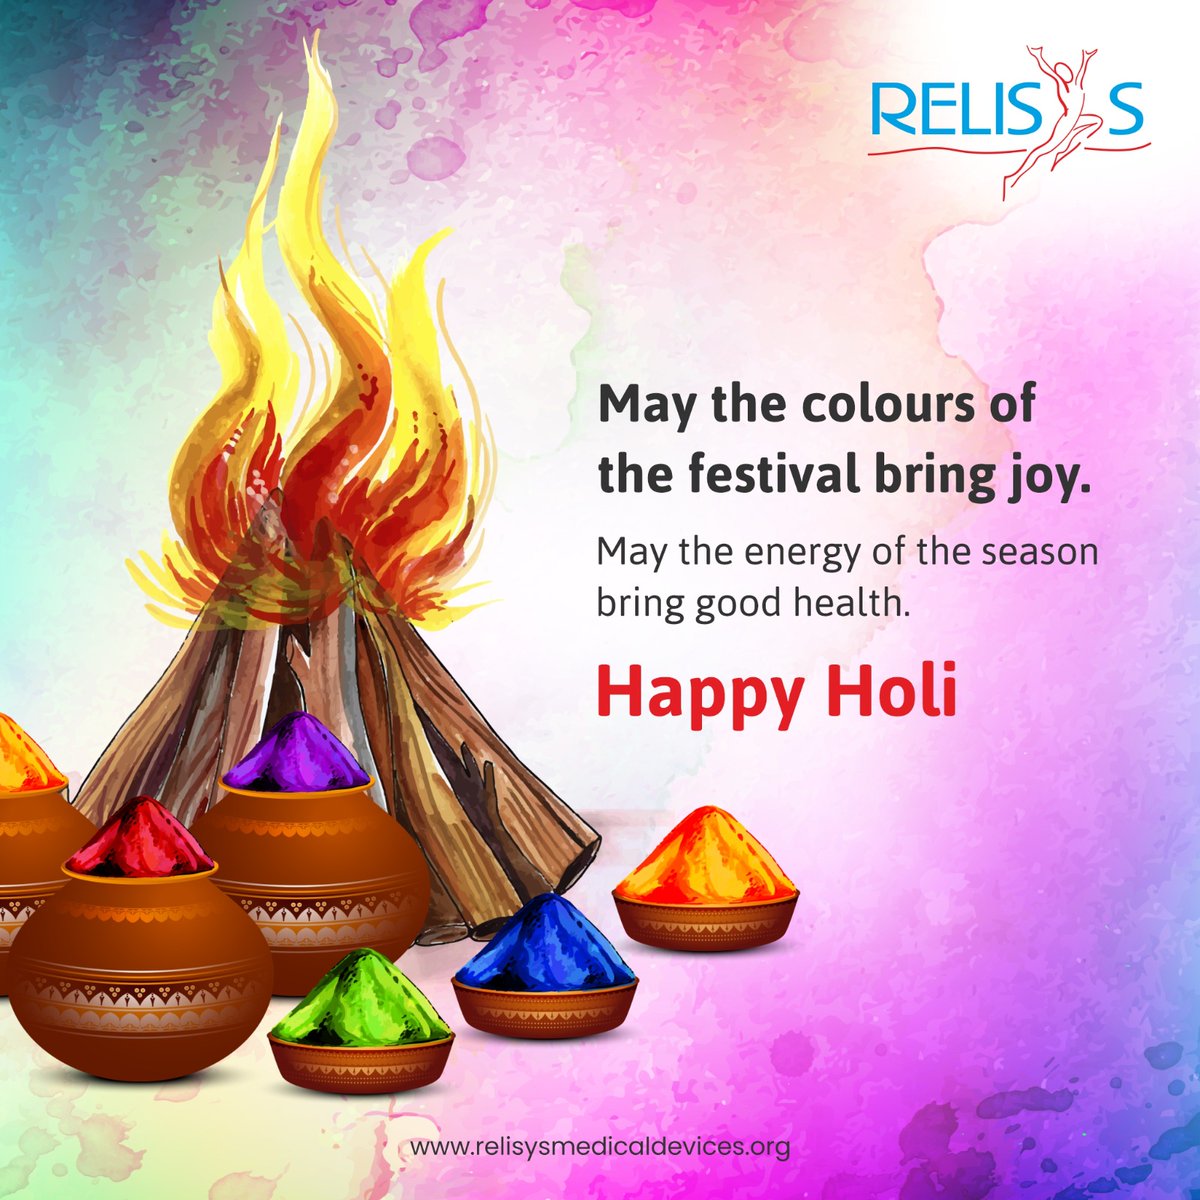 Happy #Holi! May the #colours of the #festival bring #joy! #happyfestivities #holi #festivalofcolours #togetherness #relisysmedicaldevices #structuralheart #drugelutingstents #catheters #interventionalcardiology #cardiologyinnovations @relisysmedical